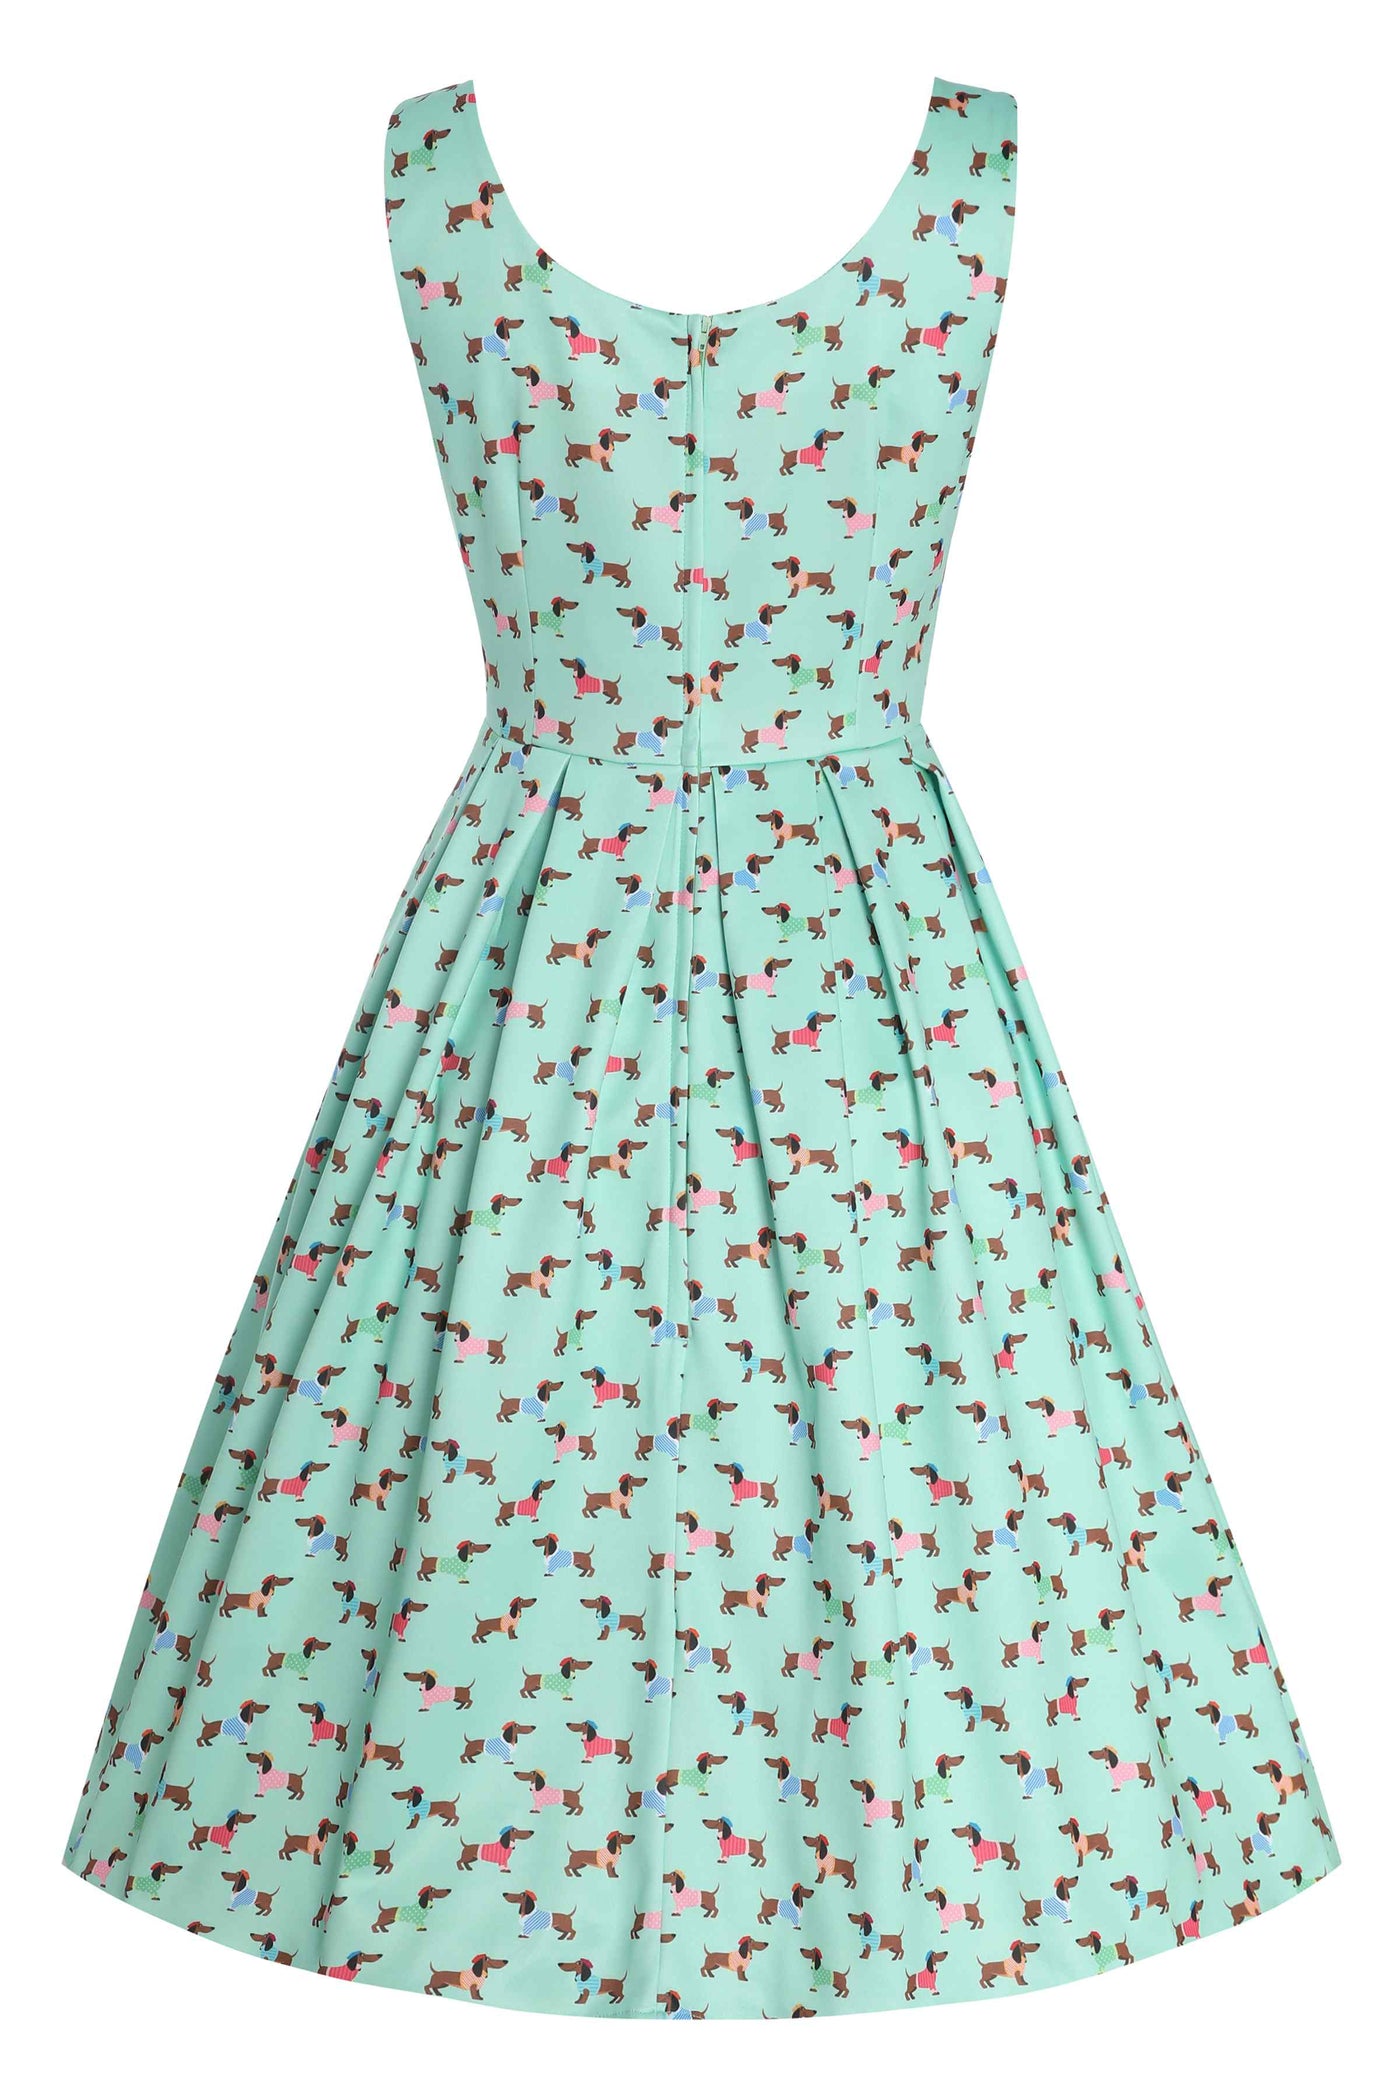 Back View of Picasso Sausage Dog Flared Dress in Mint